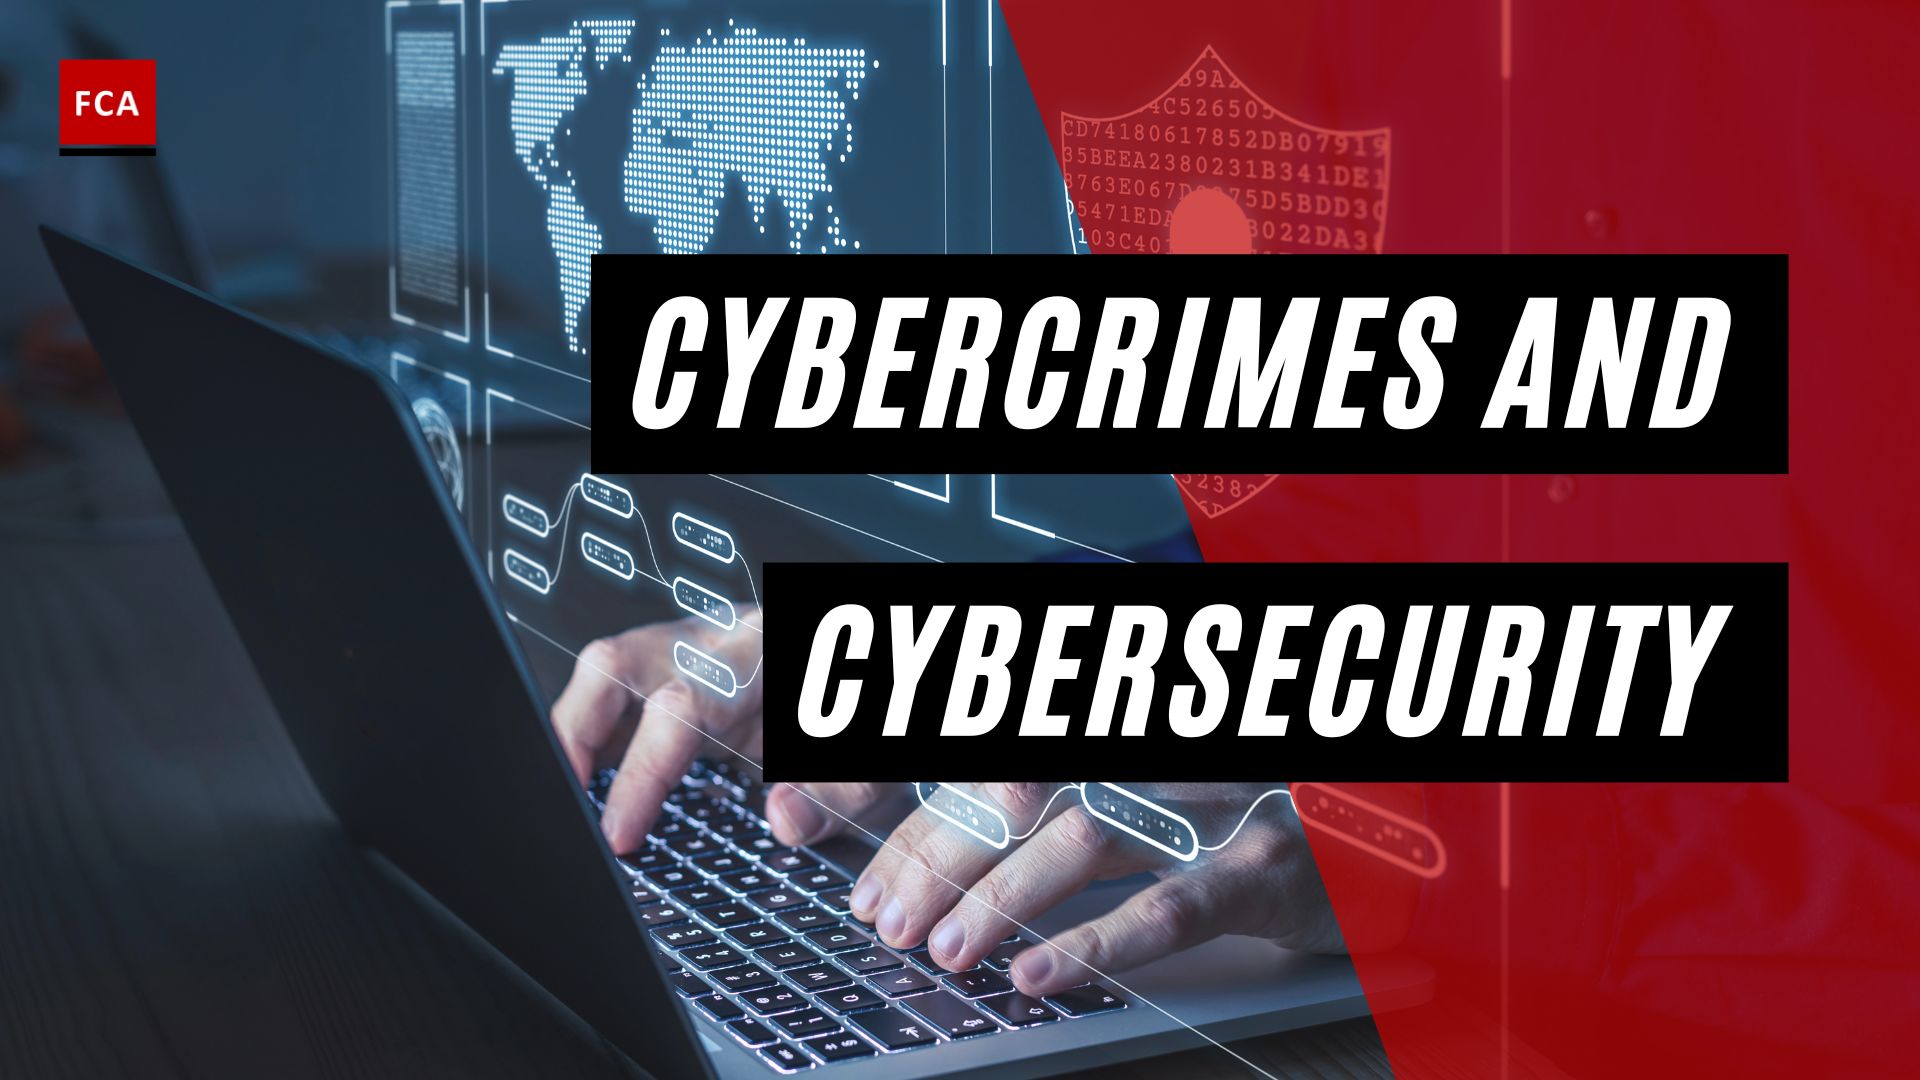 Cybercrimes And Cybersecurity